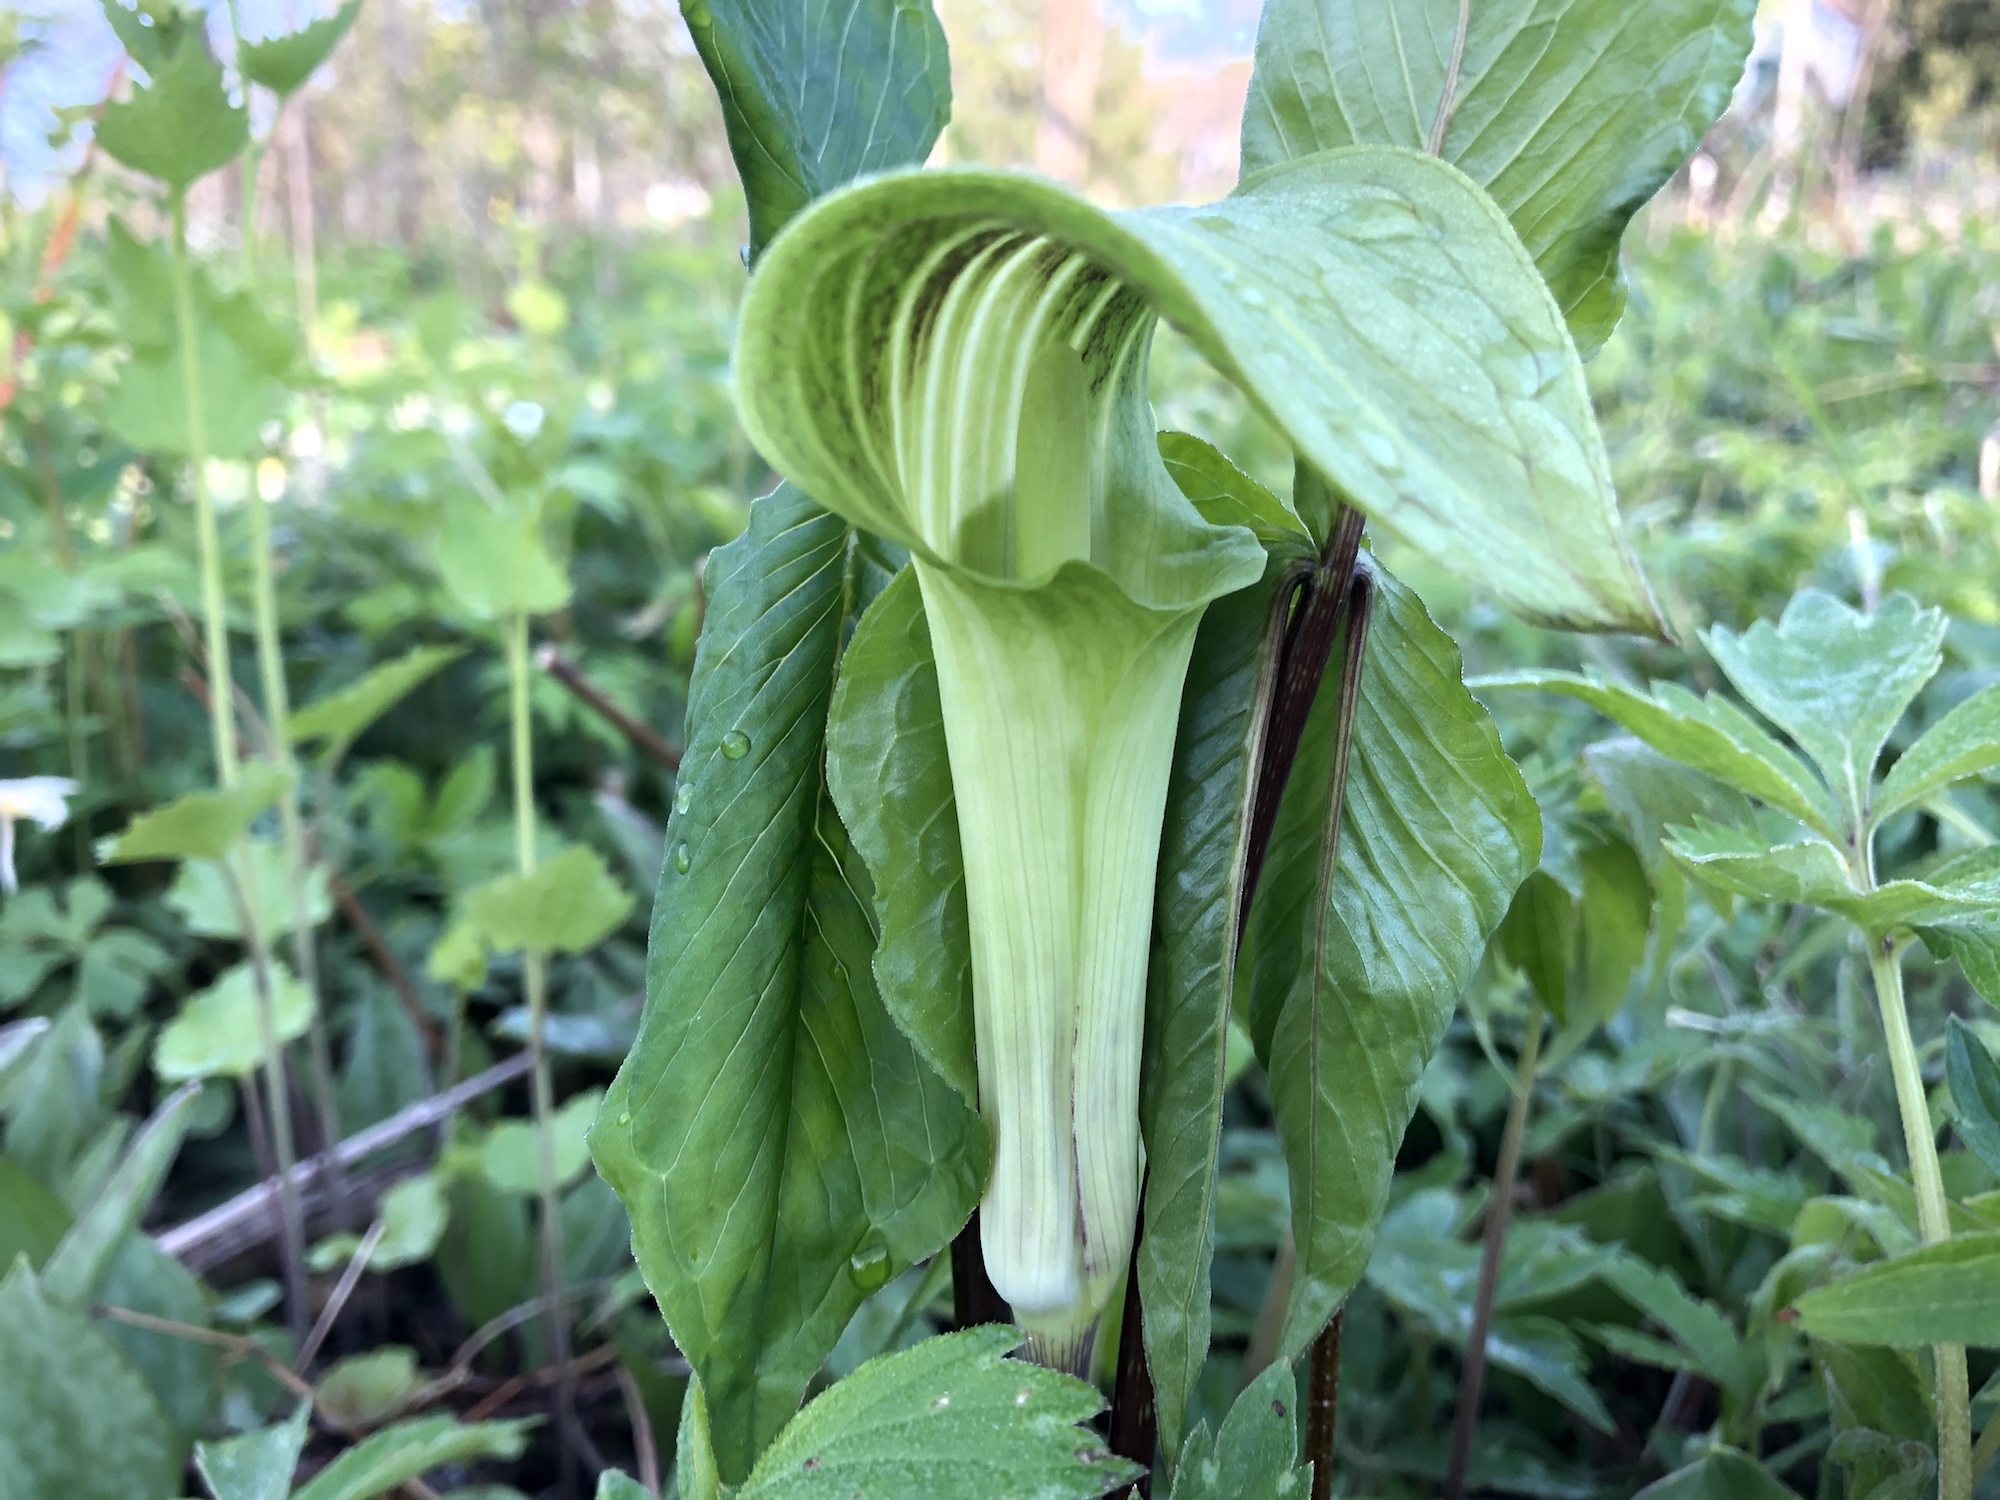 Jack-in-the-pulpit in Oak Savanna on May 6, 2020